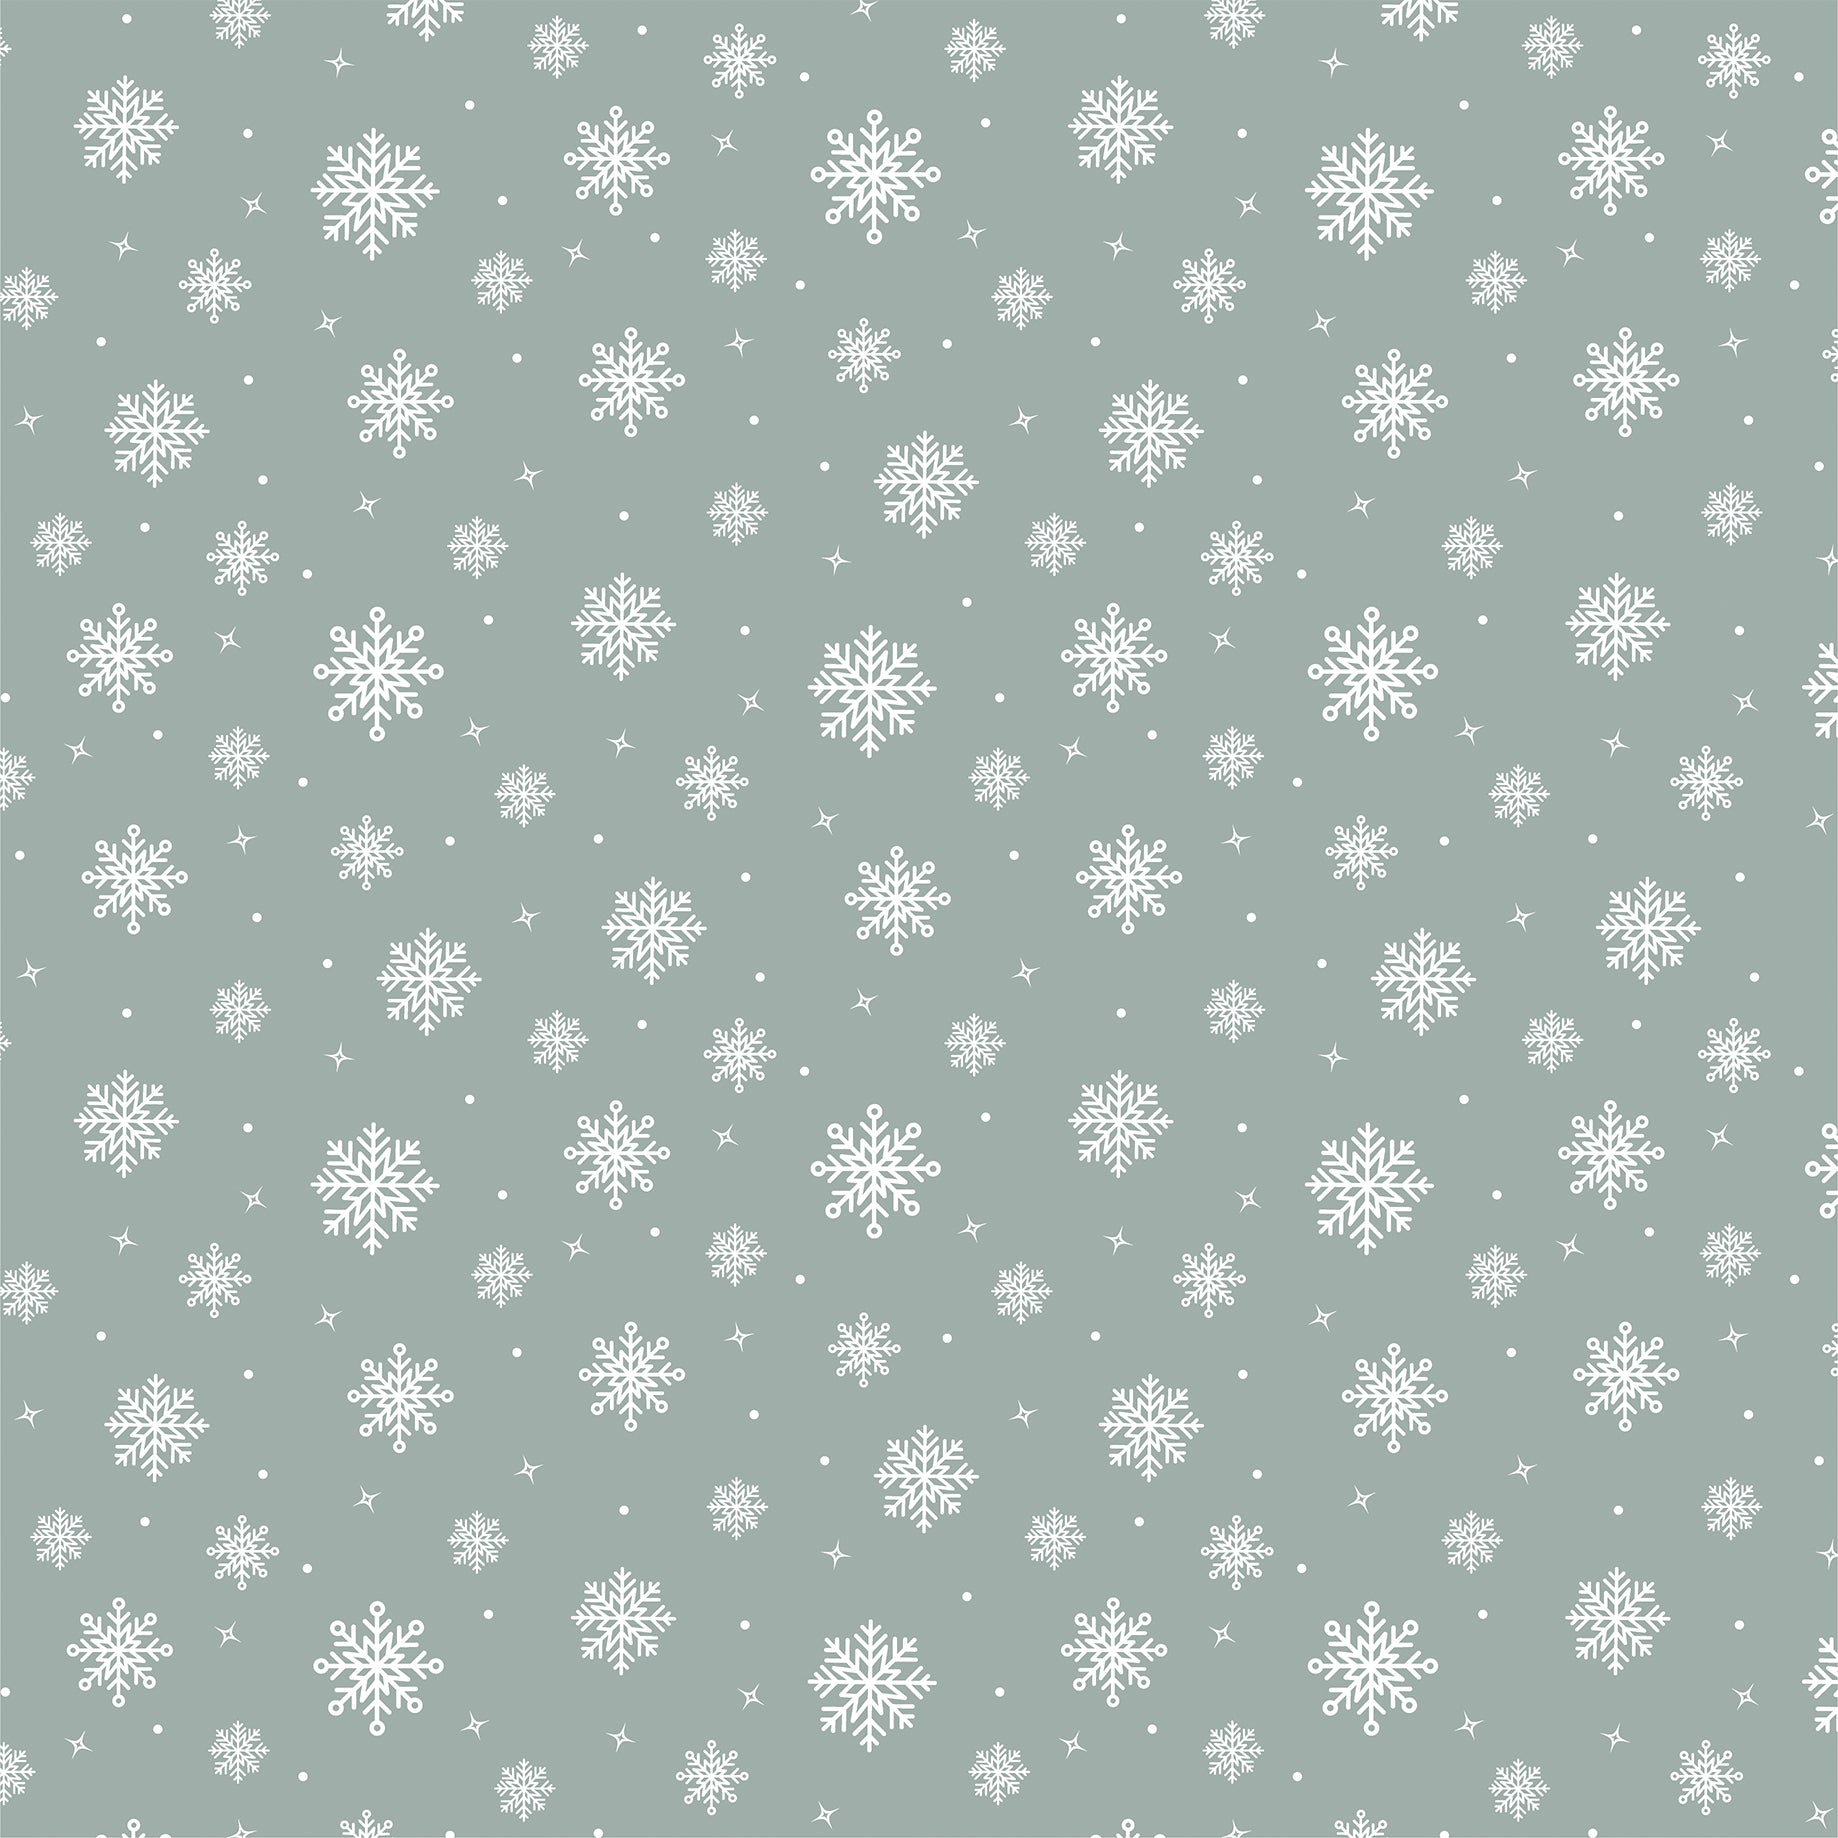 Winterland Collection Welcome Winter 12 x 12 Double-Sided Scrapbook Paper by Echo Park Paper